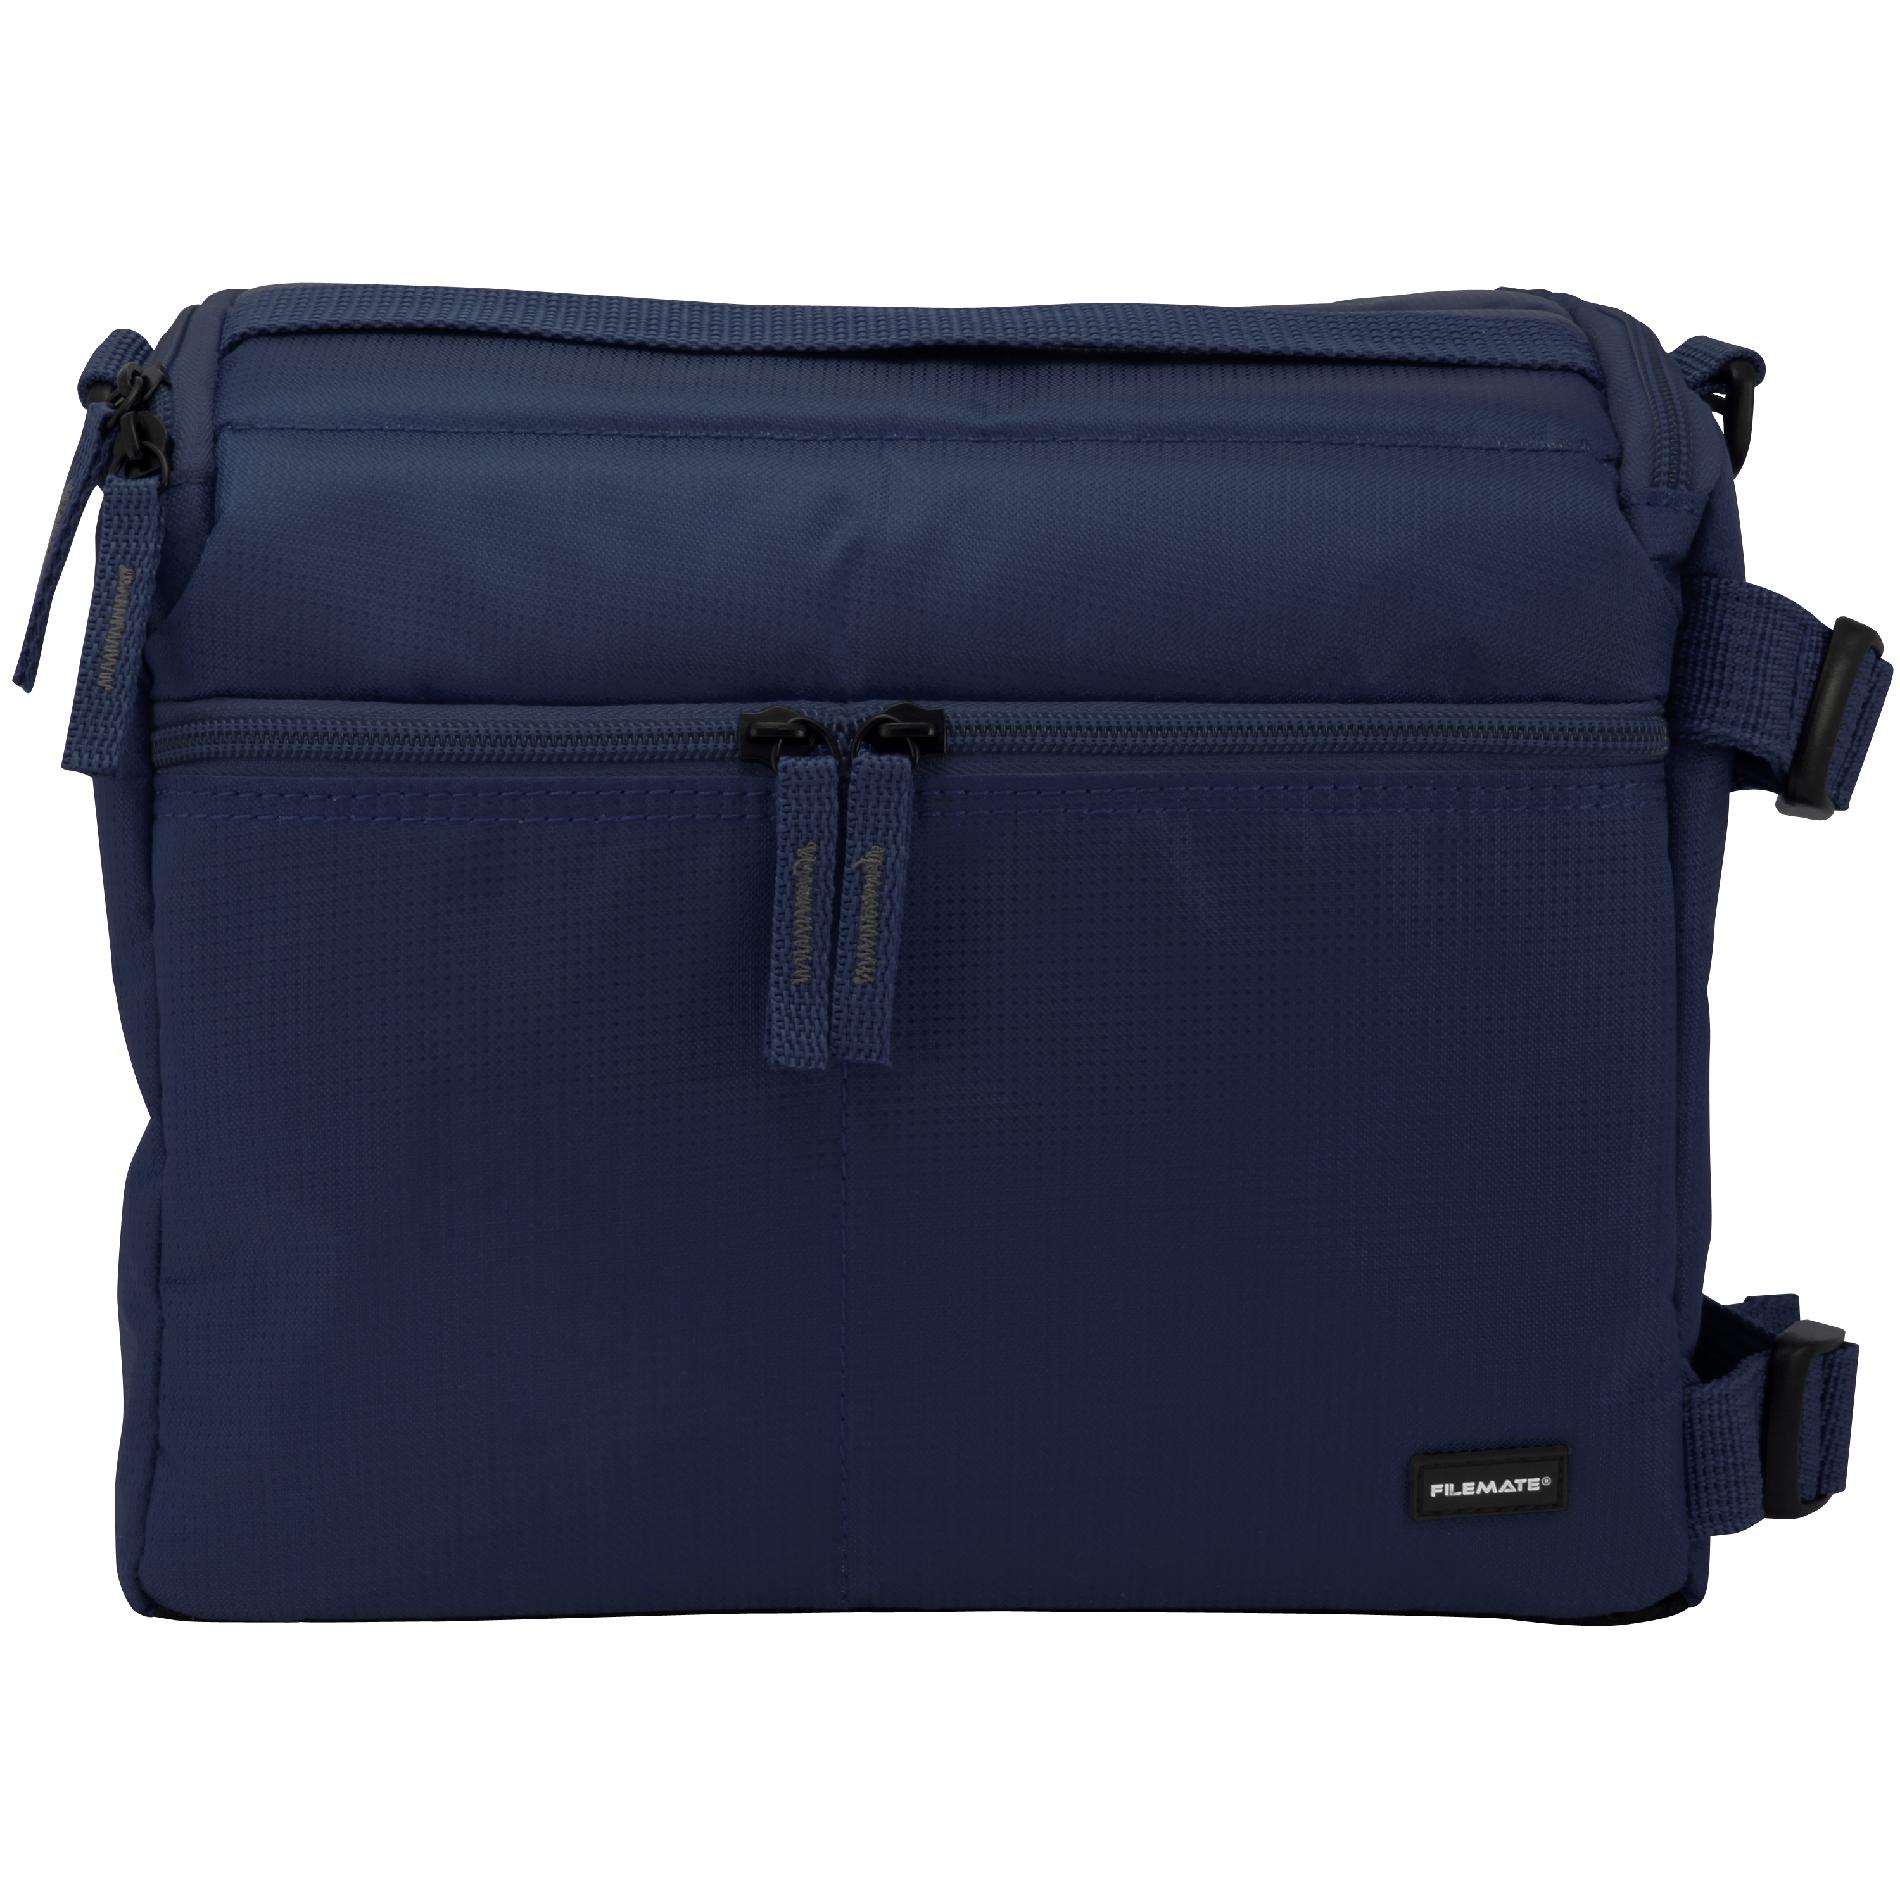 Filemate ECO Deluxe SLR Camera Bag - Navy